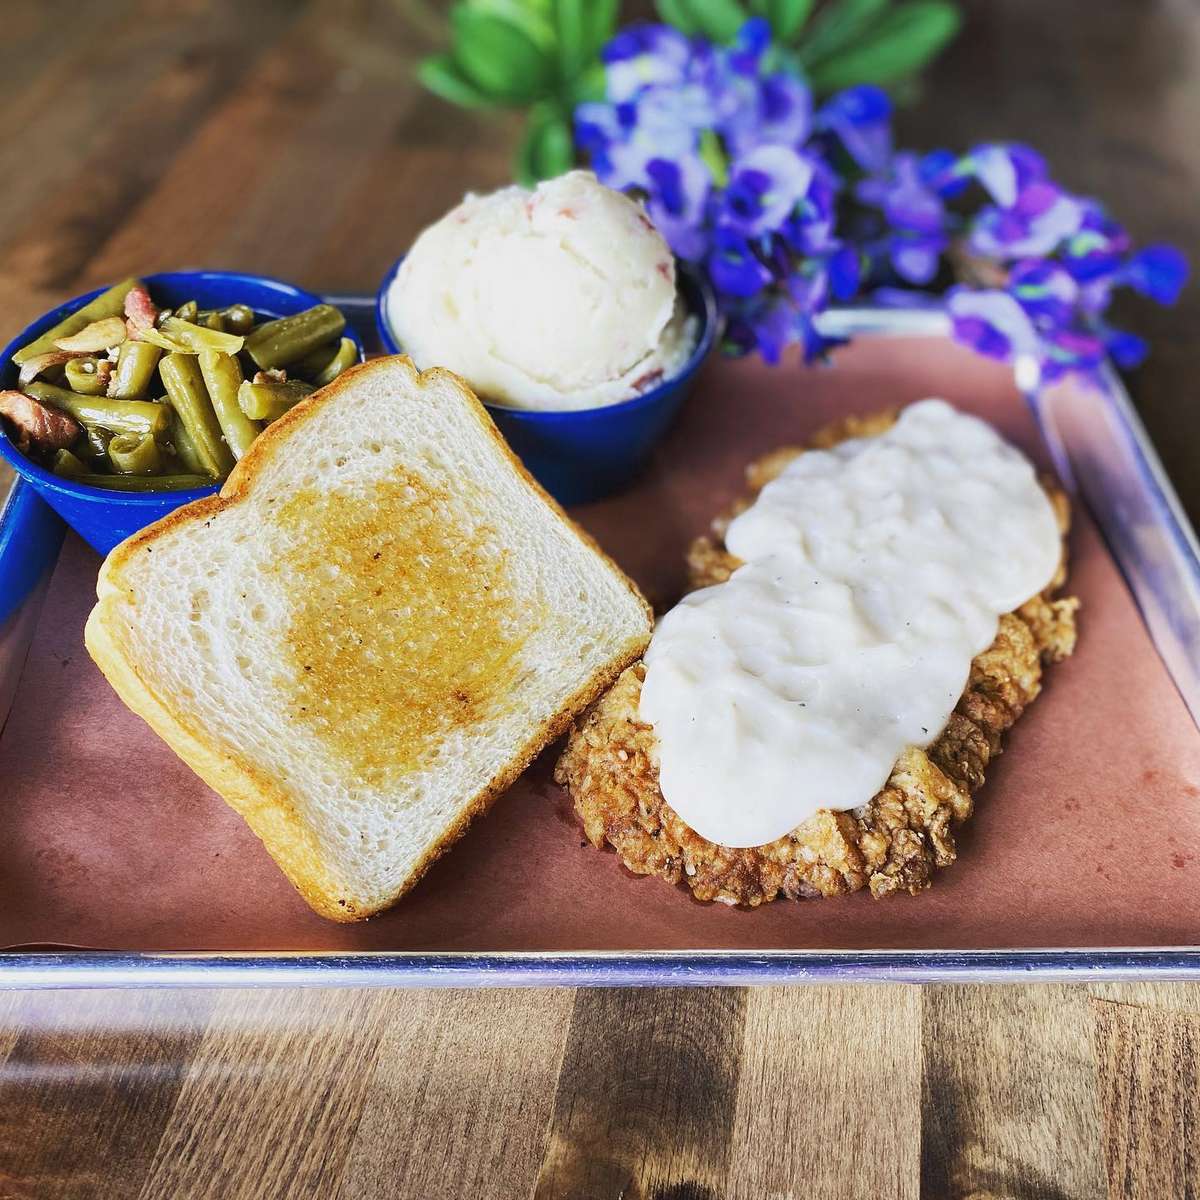 country fried steak with gravy and sides